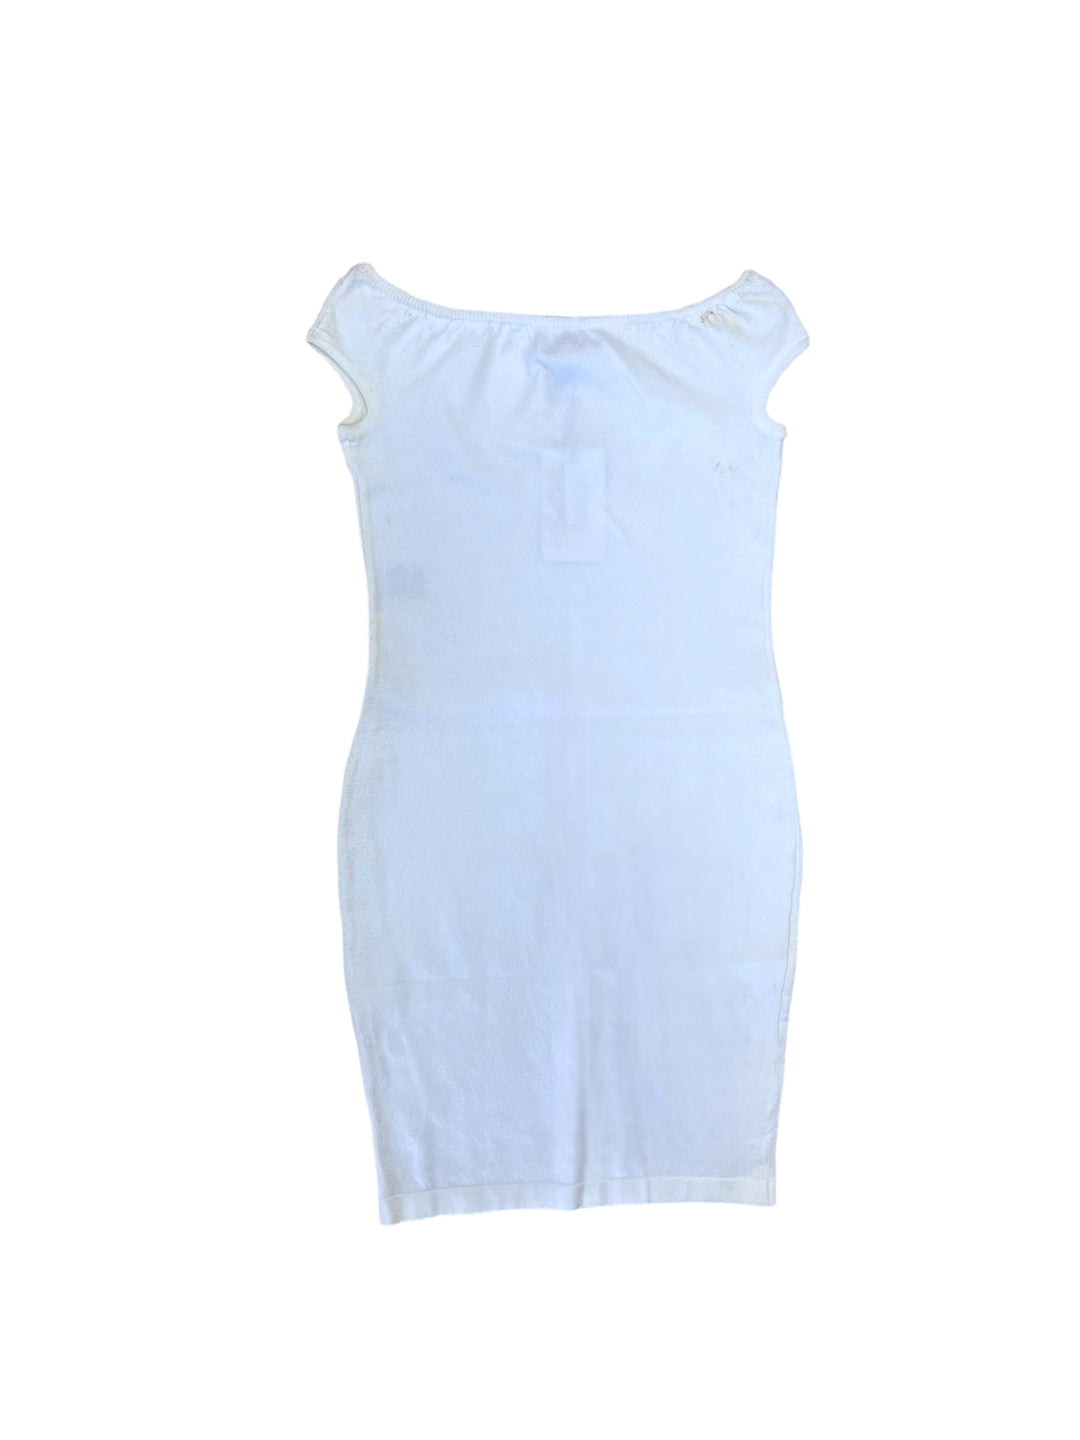 Guess Deadstock white cotton dress small